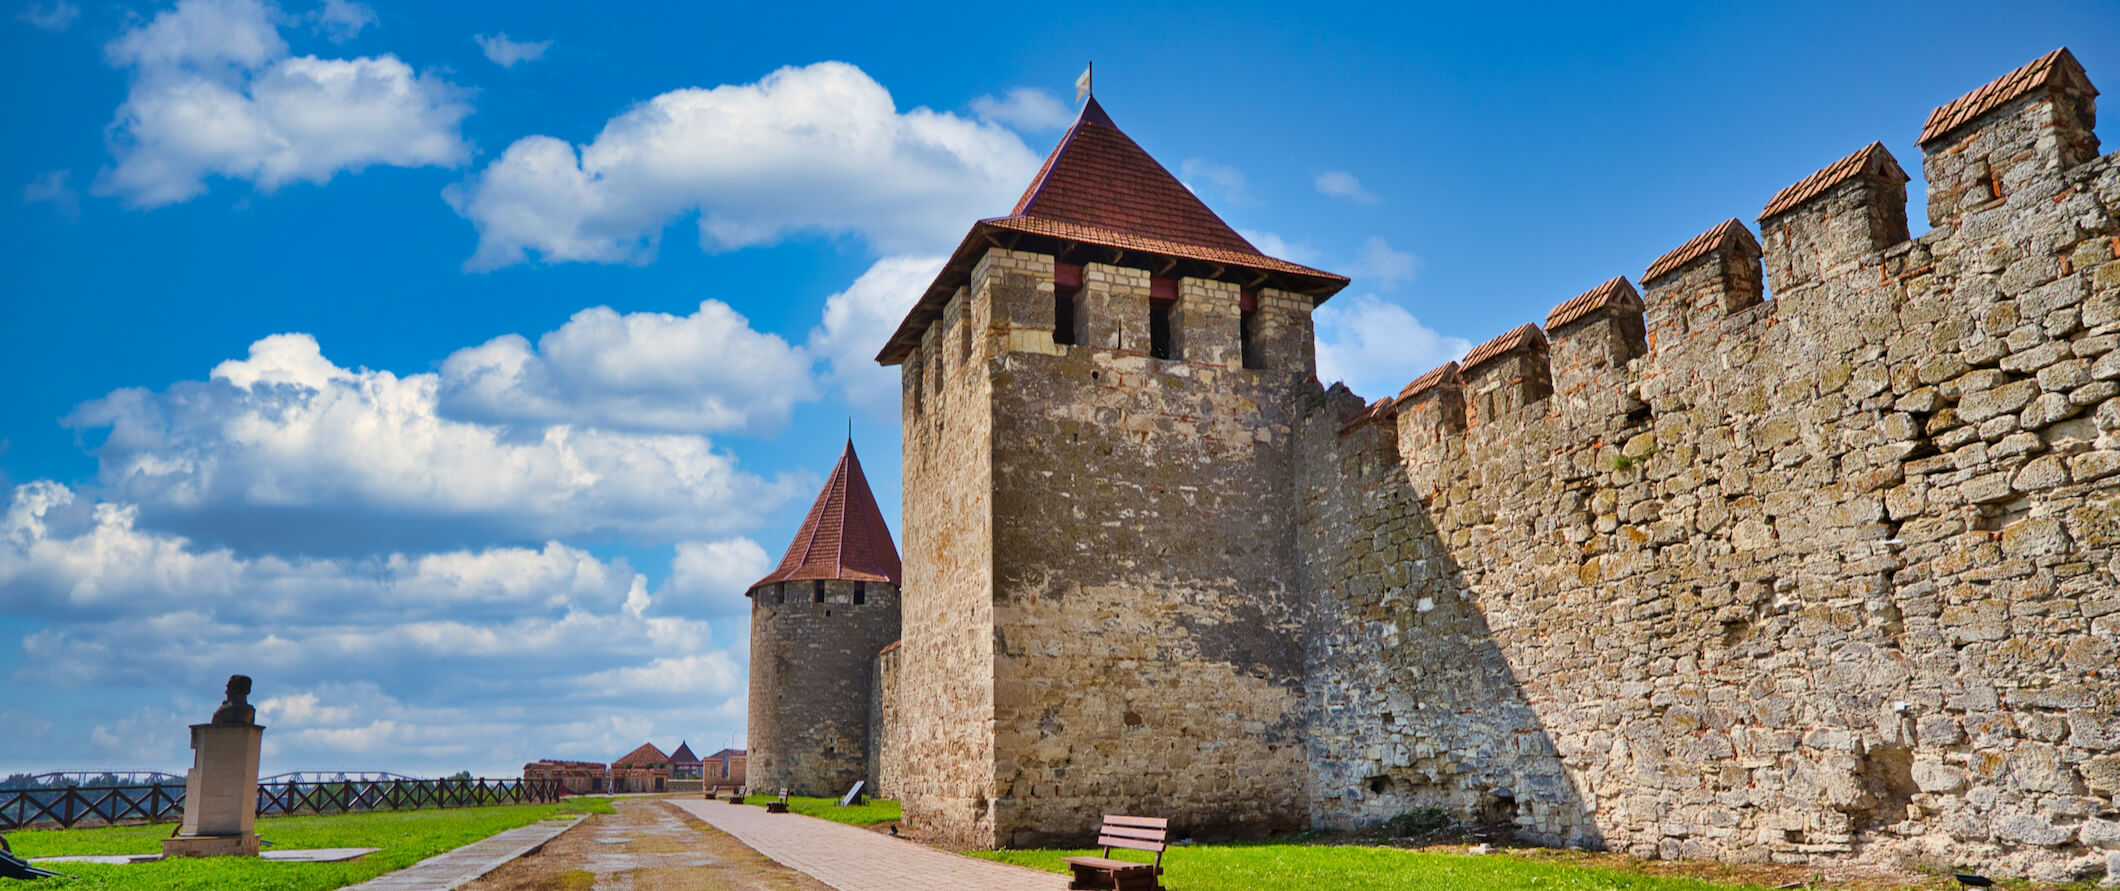 The massive Bendery Fortress in Moldova with its huge, stout walls on a sunny summer day